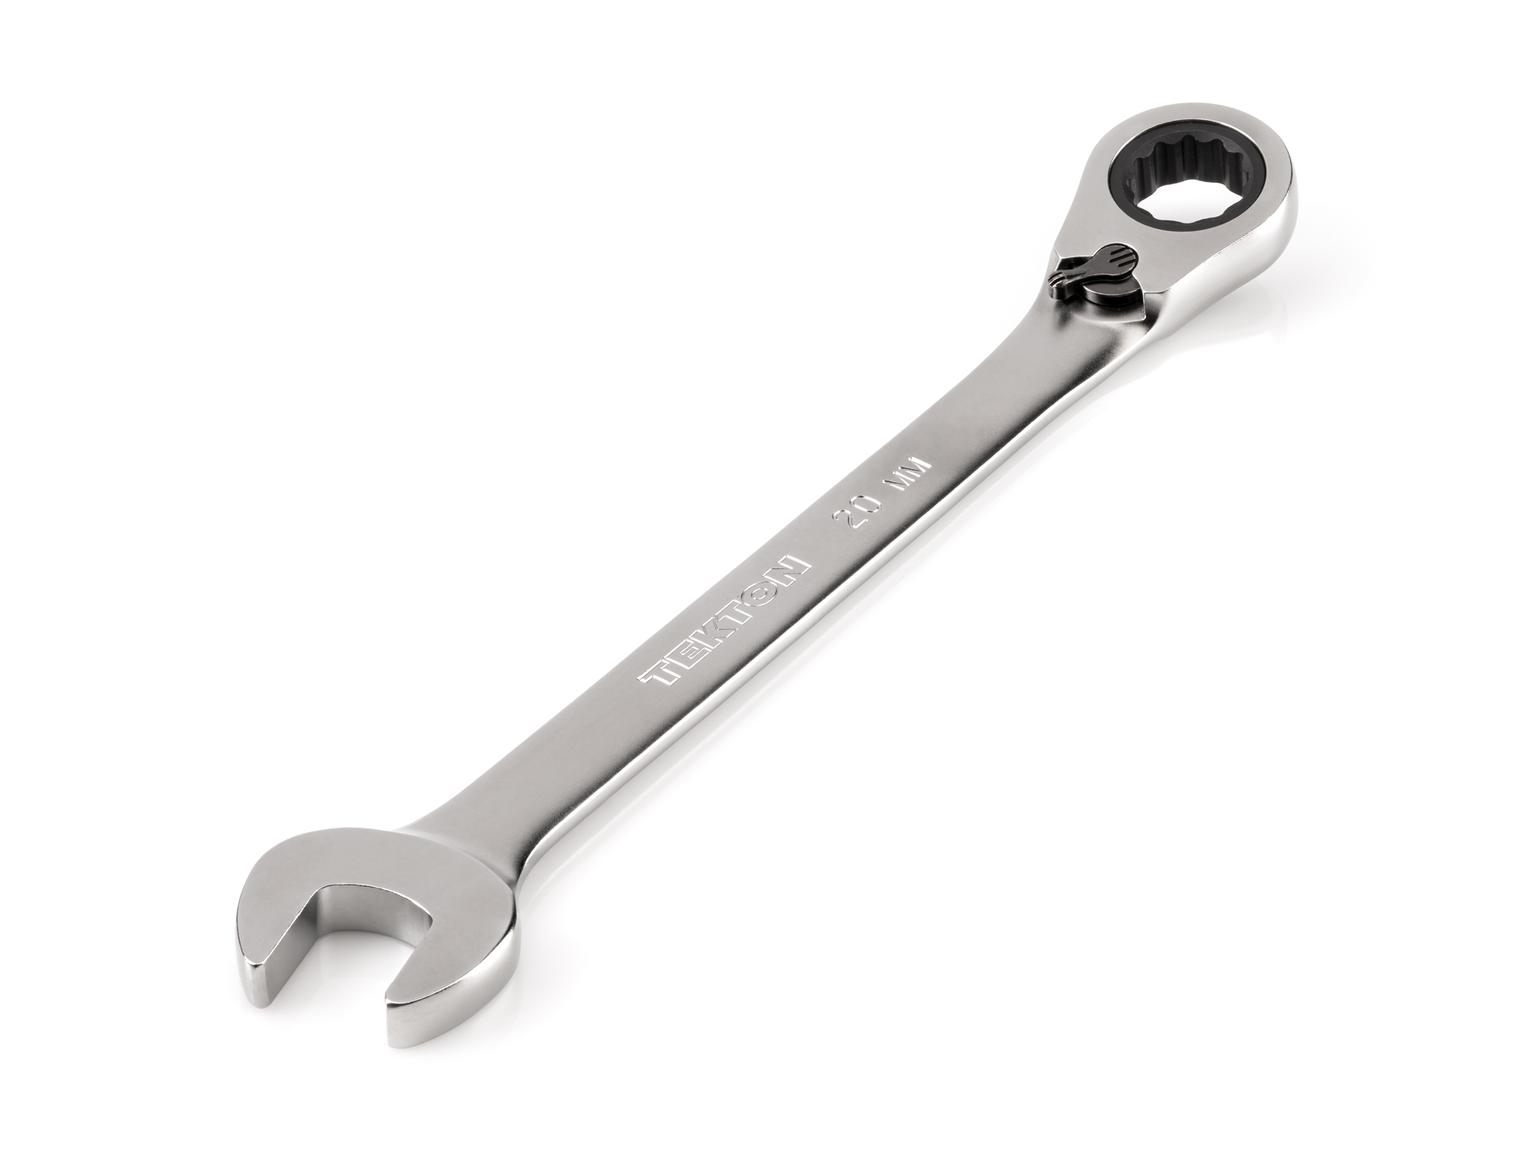 TEKTON WRC23420-T 20 mm Reversible 12-Point Ratcheting Combination Wrench